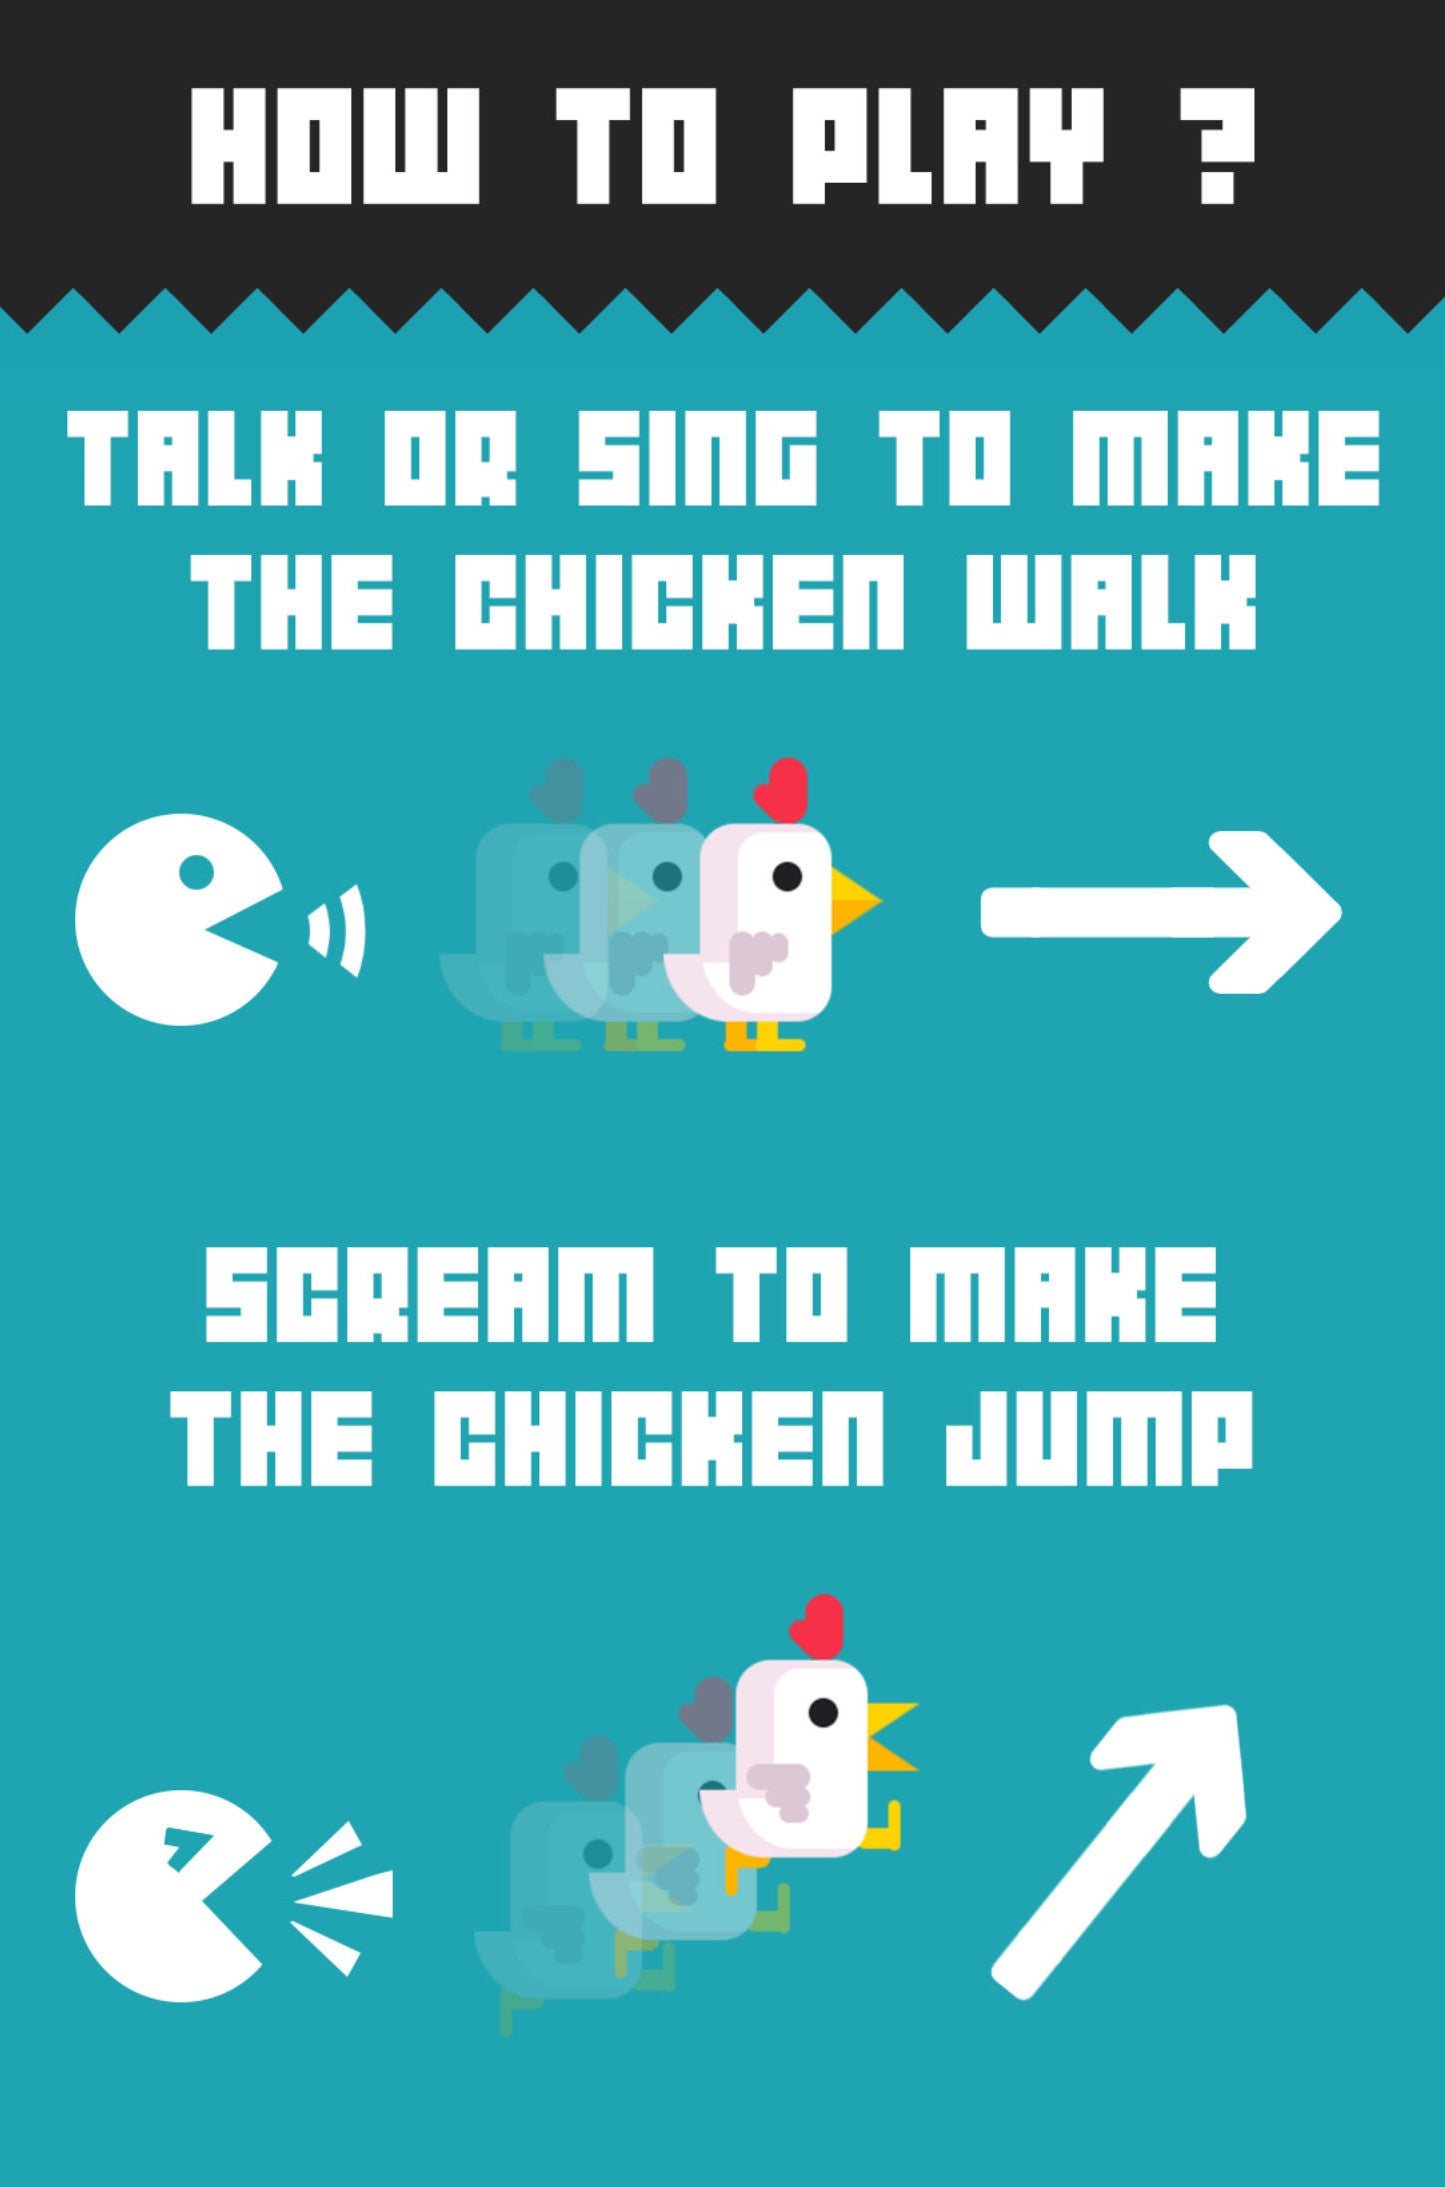 Don't pretend like you've never dreamed of a game that's controlled entirely by shouting - Chicken Scream is a game where you make a chicken run by shouting at your phone